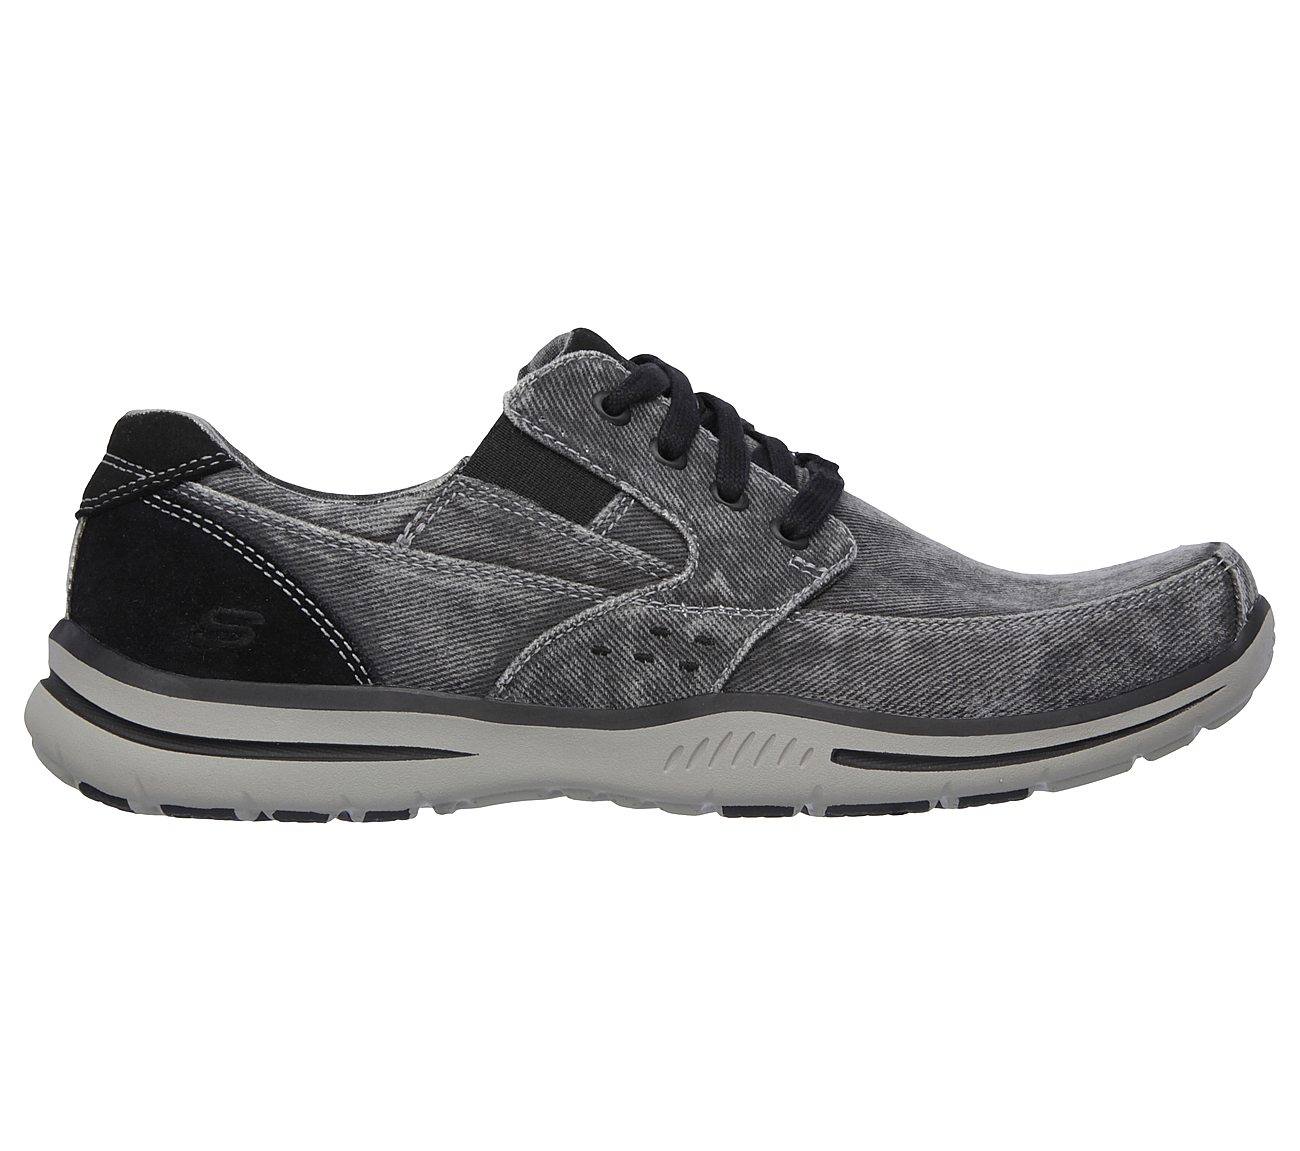 Buy SKECHERS Relaxed Fit: Elected - Fultone USA Casuals Shoes